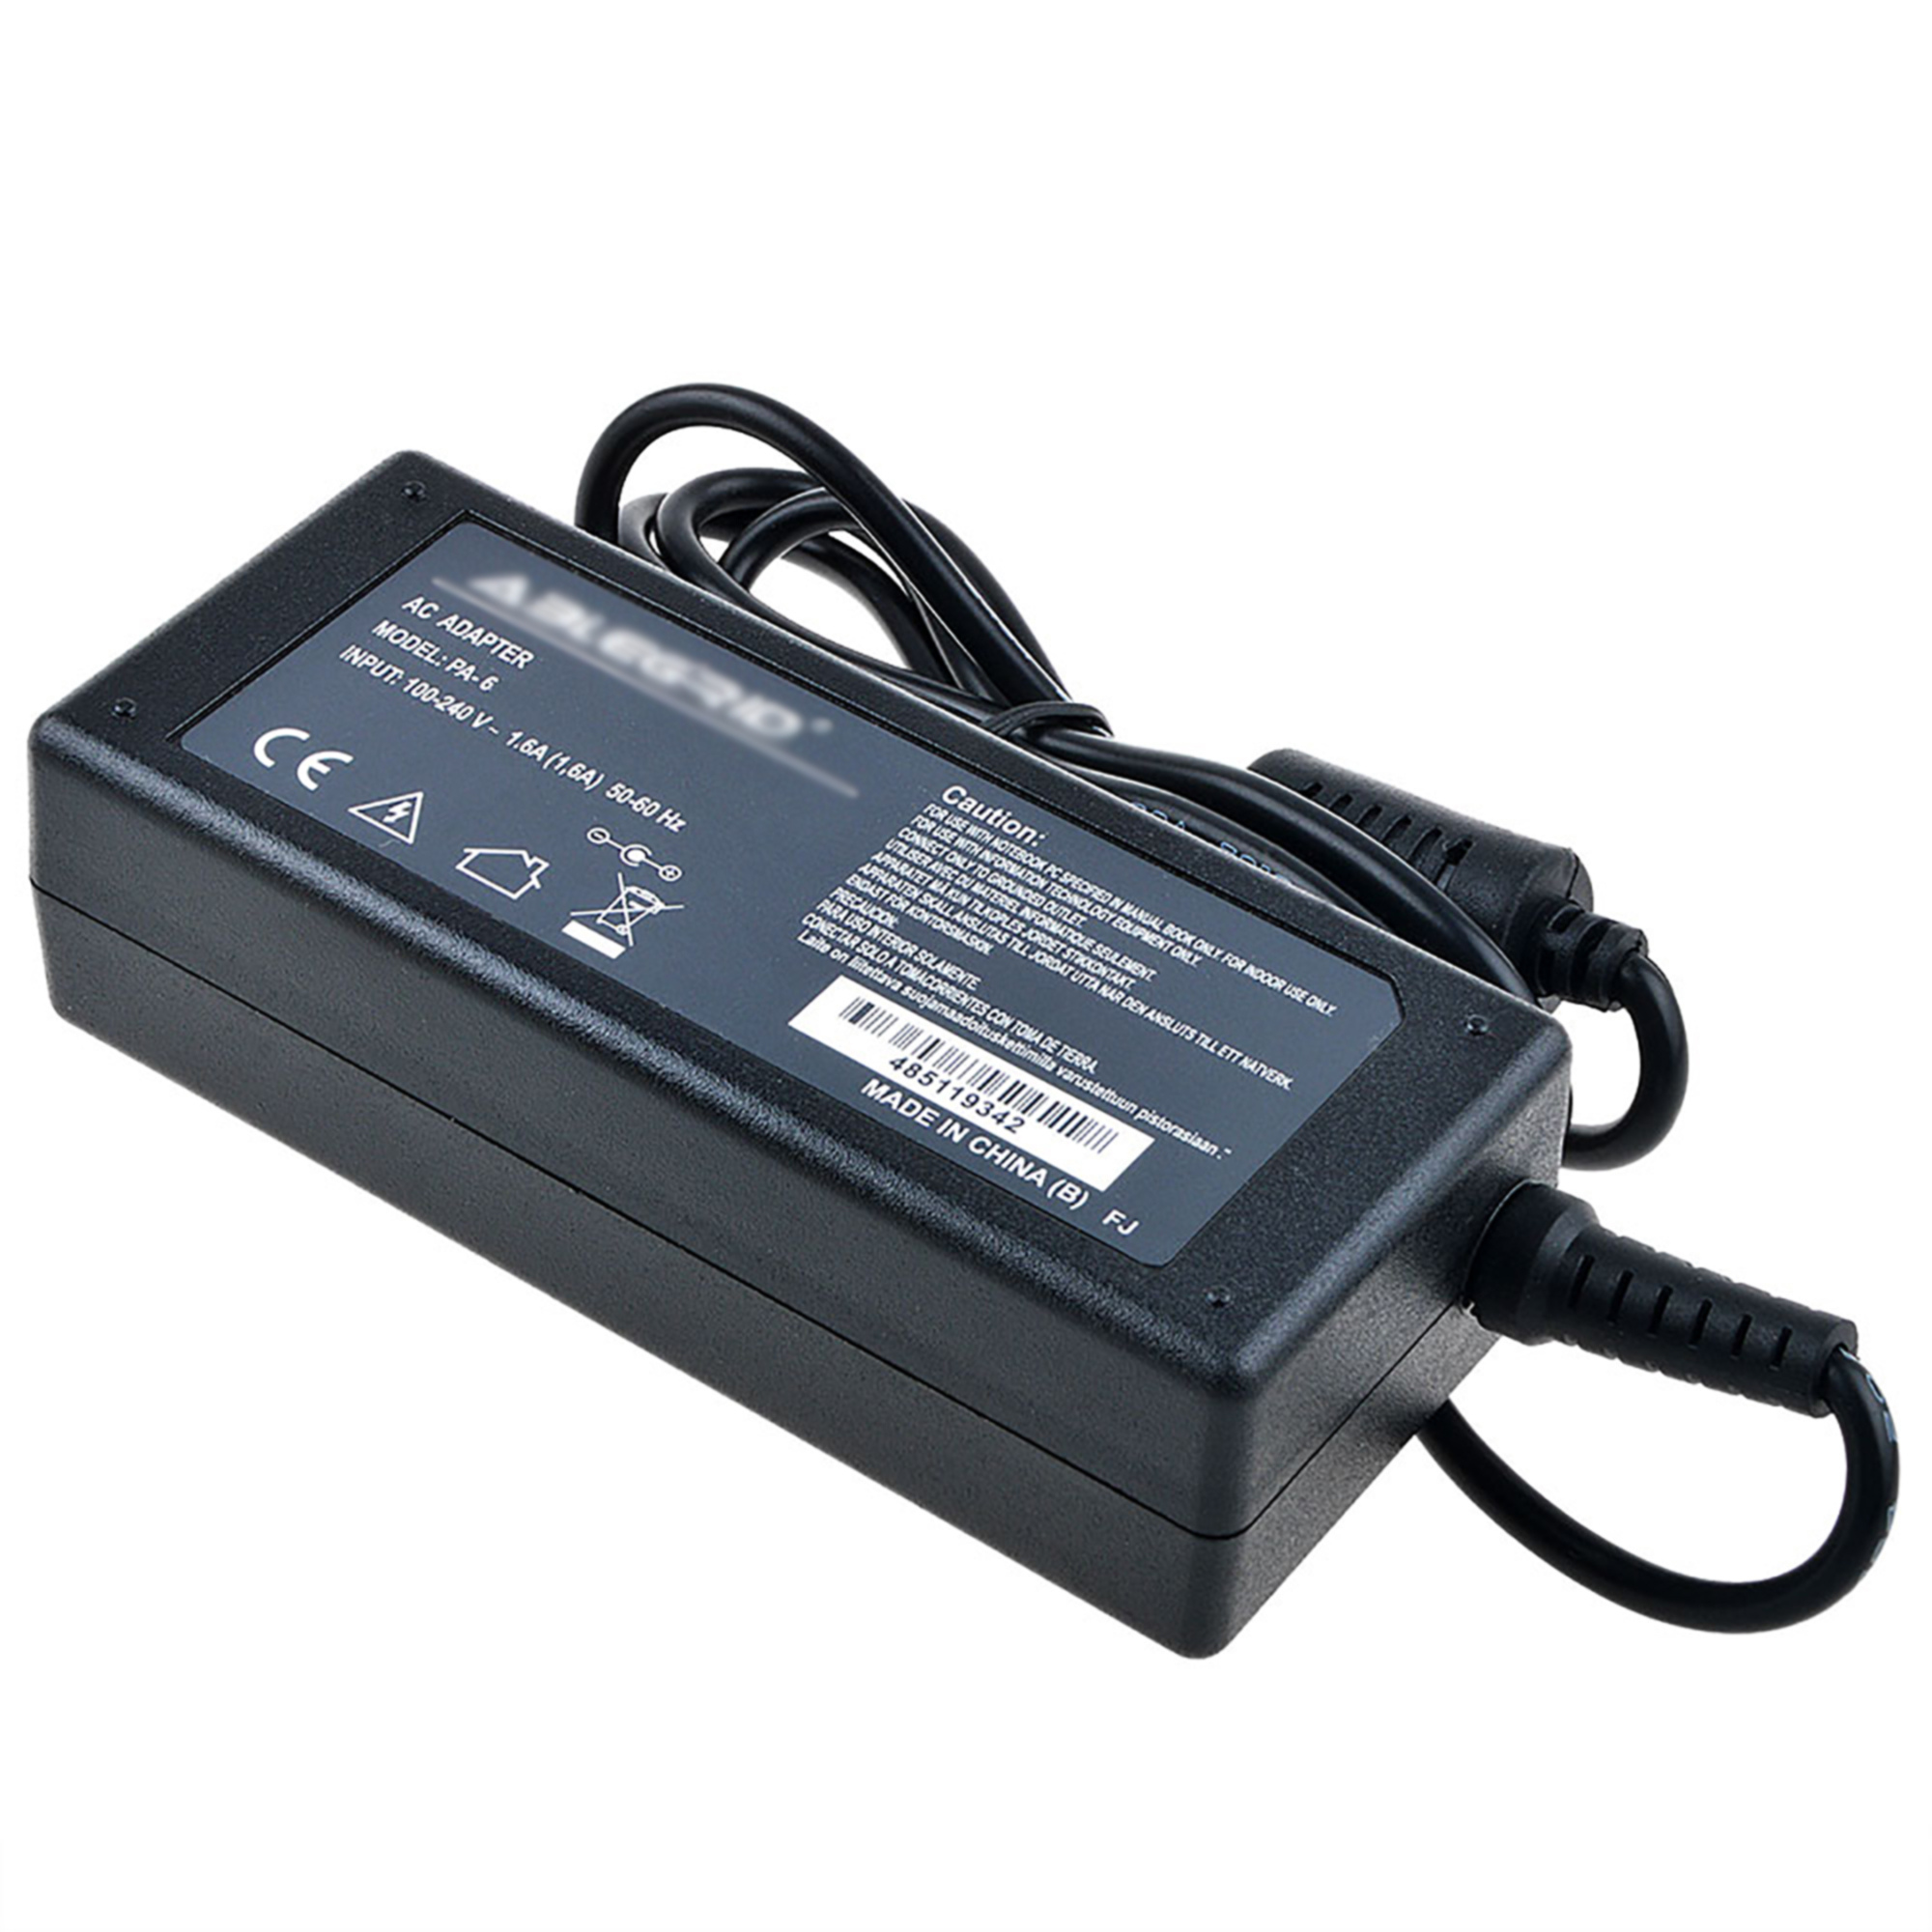 PKPOWER 16V 2.5A AC DC Adapter for ScanSnap SV600 FI-SV600 FI-SV600A FI-SV600A-P PA03641-B305 fi-7030 PA03750-B005 PA03750-B001 N7100 PA03706-B205 Scanner, FMC-AC313S Power Supply - image 4 of 5